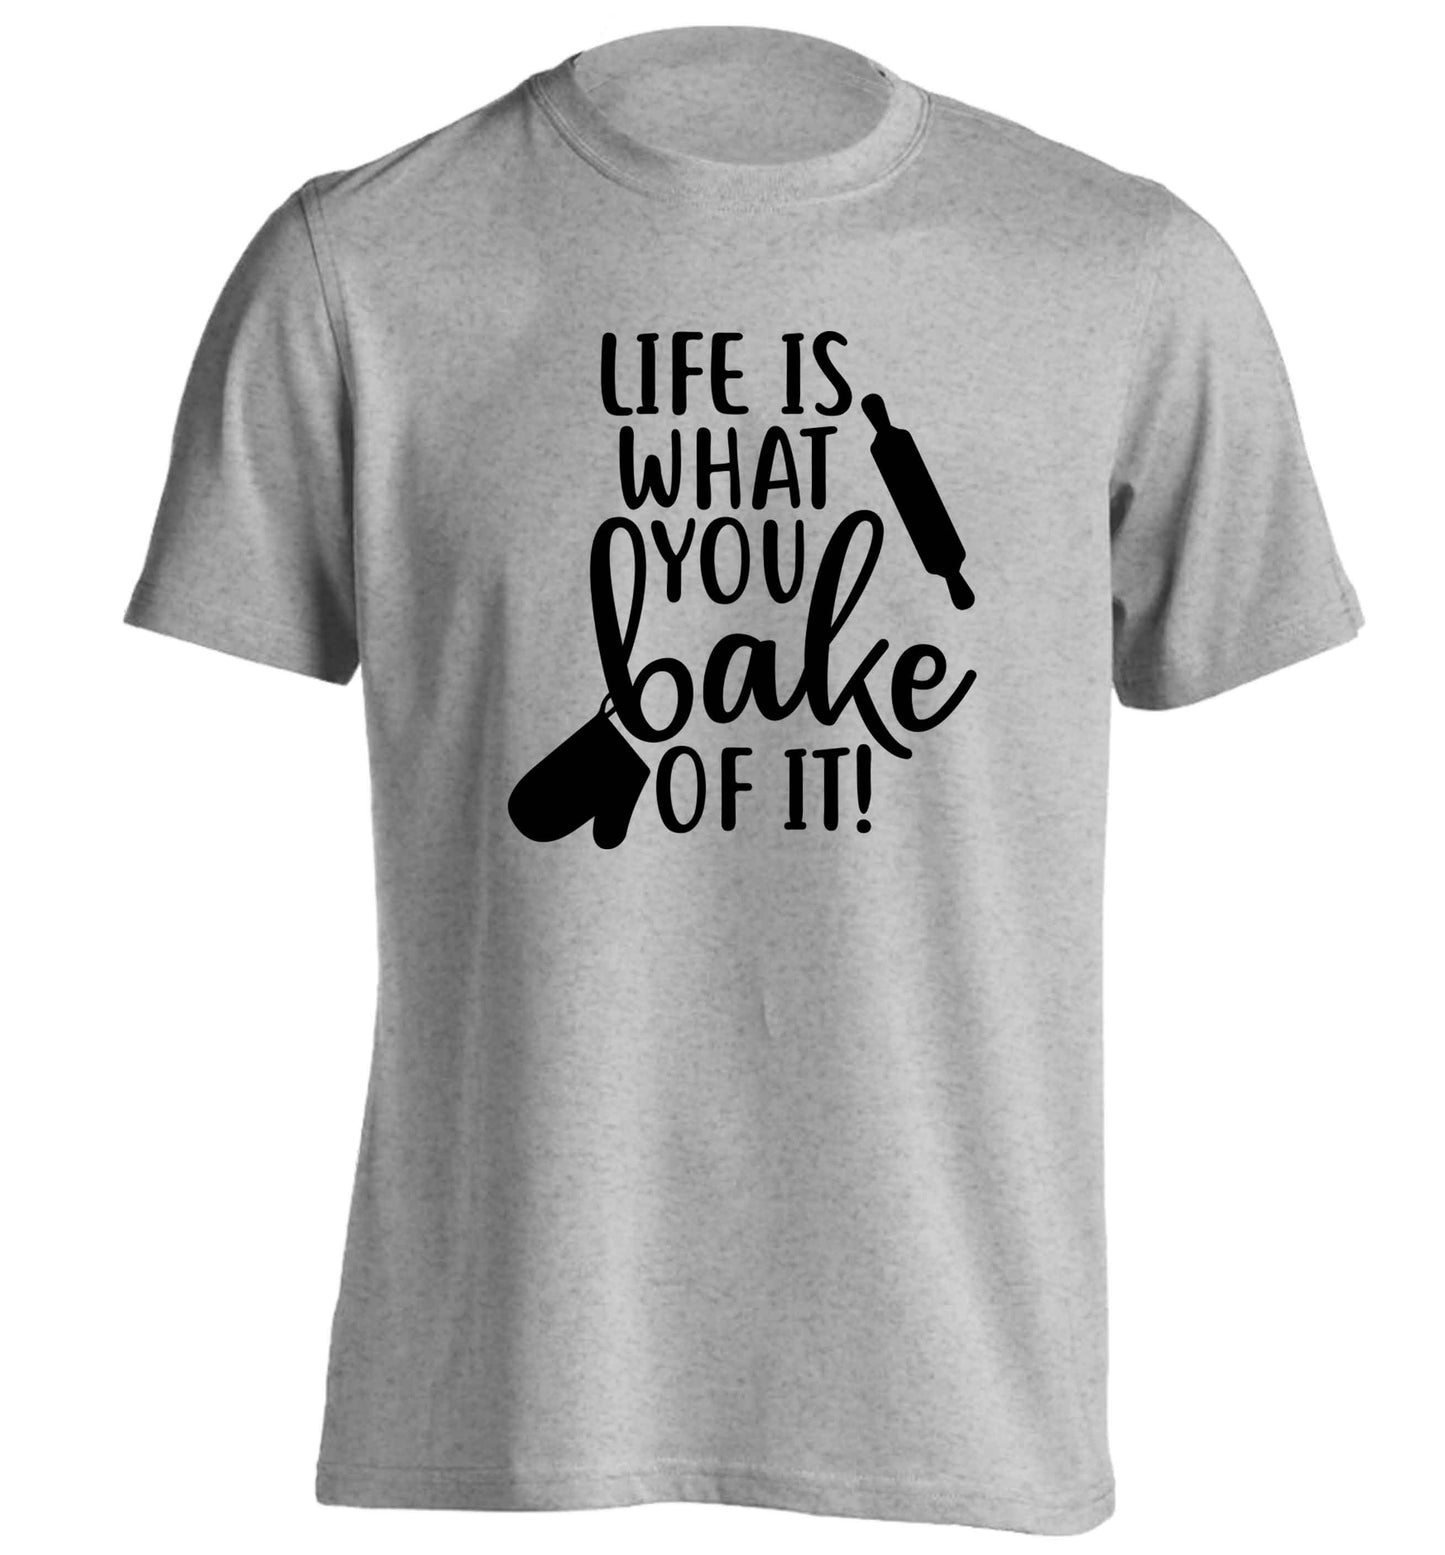 Life is what you bake of it adults unisex grey Tshirt 2XL